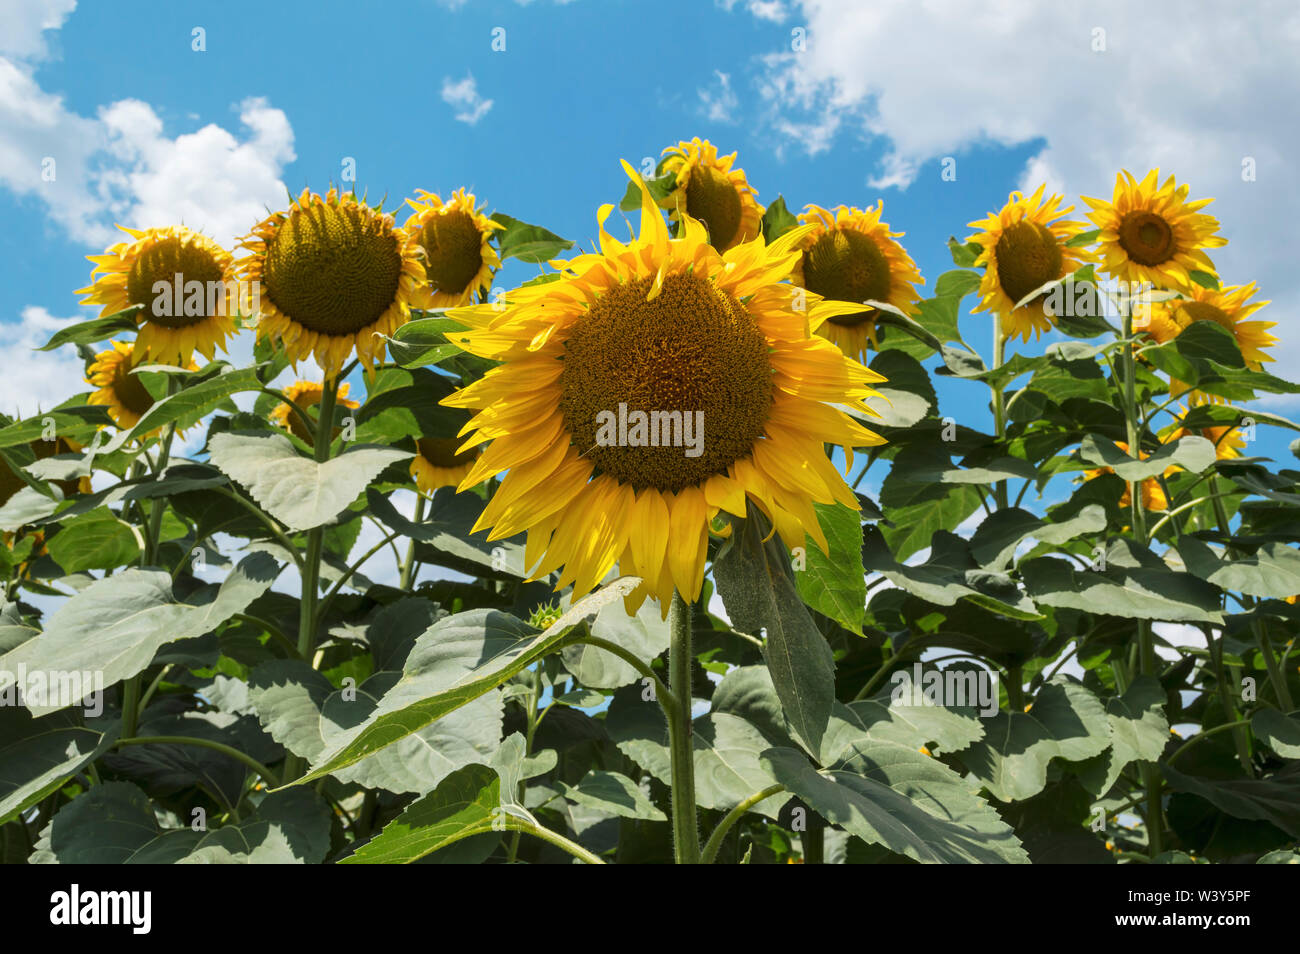 Blooming sunflowers in the field with blue sky and white clouds in the background, agricultural concept Stock Photo